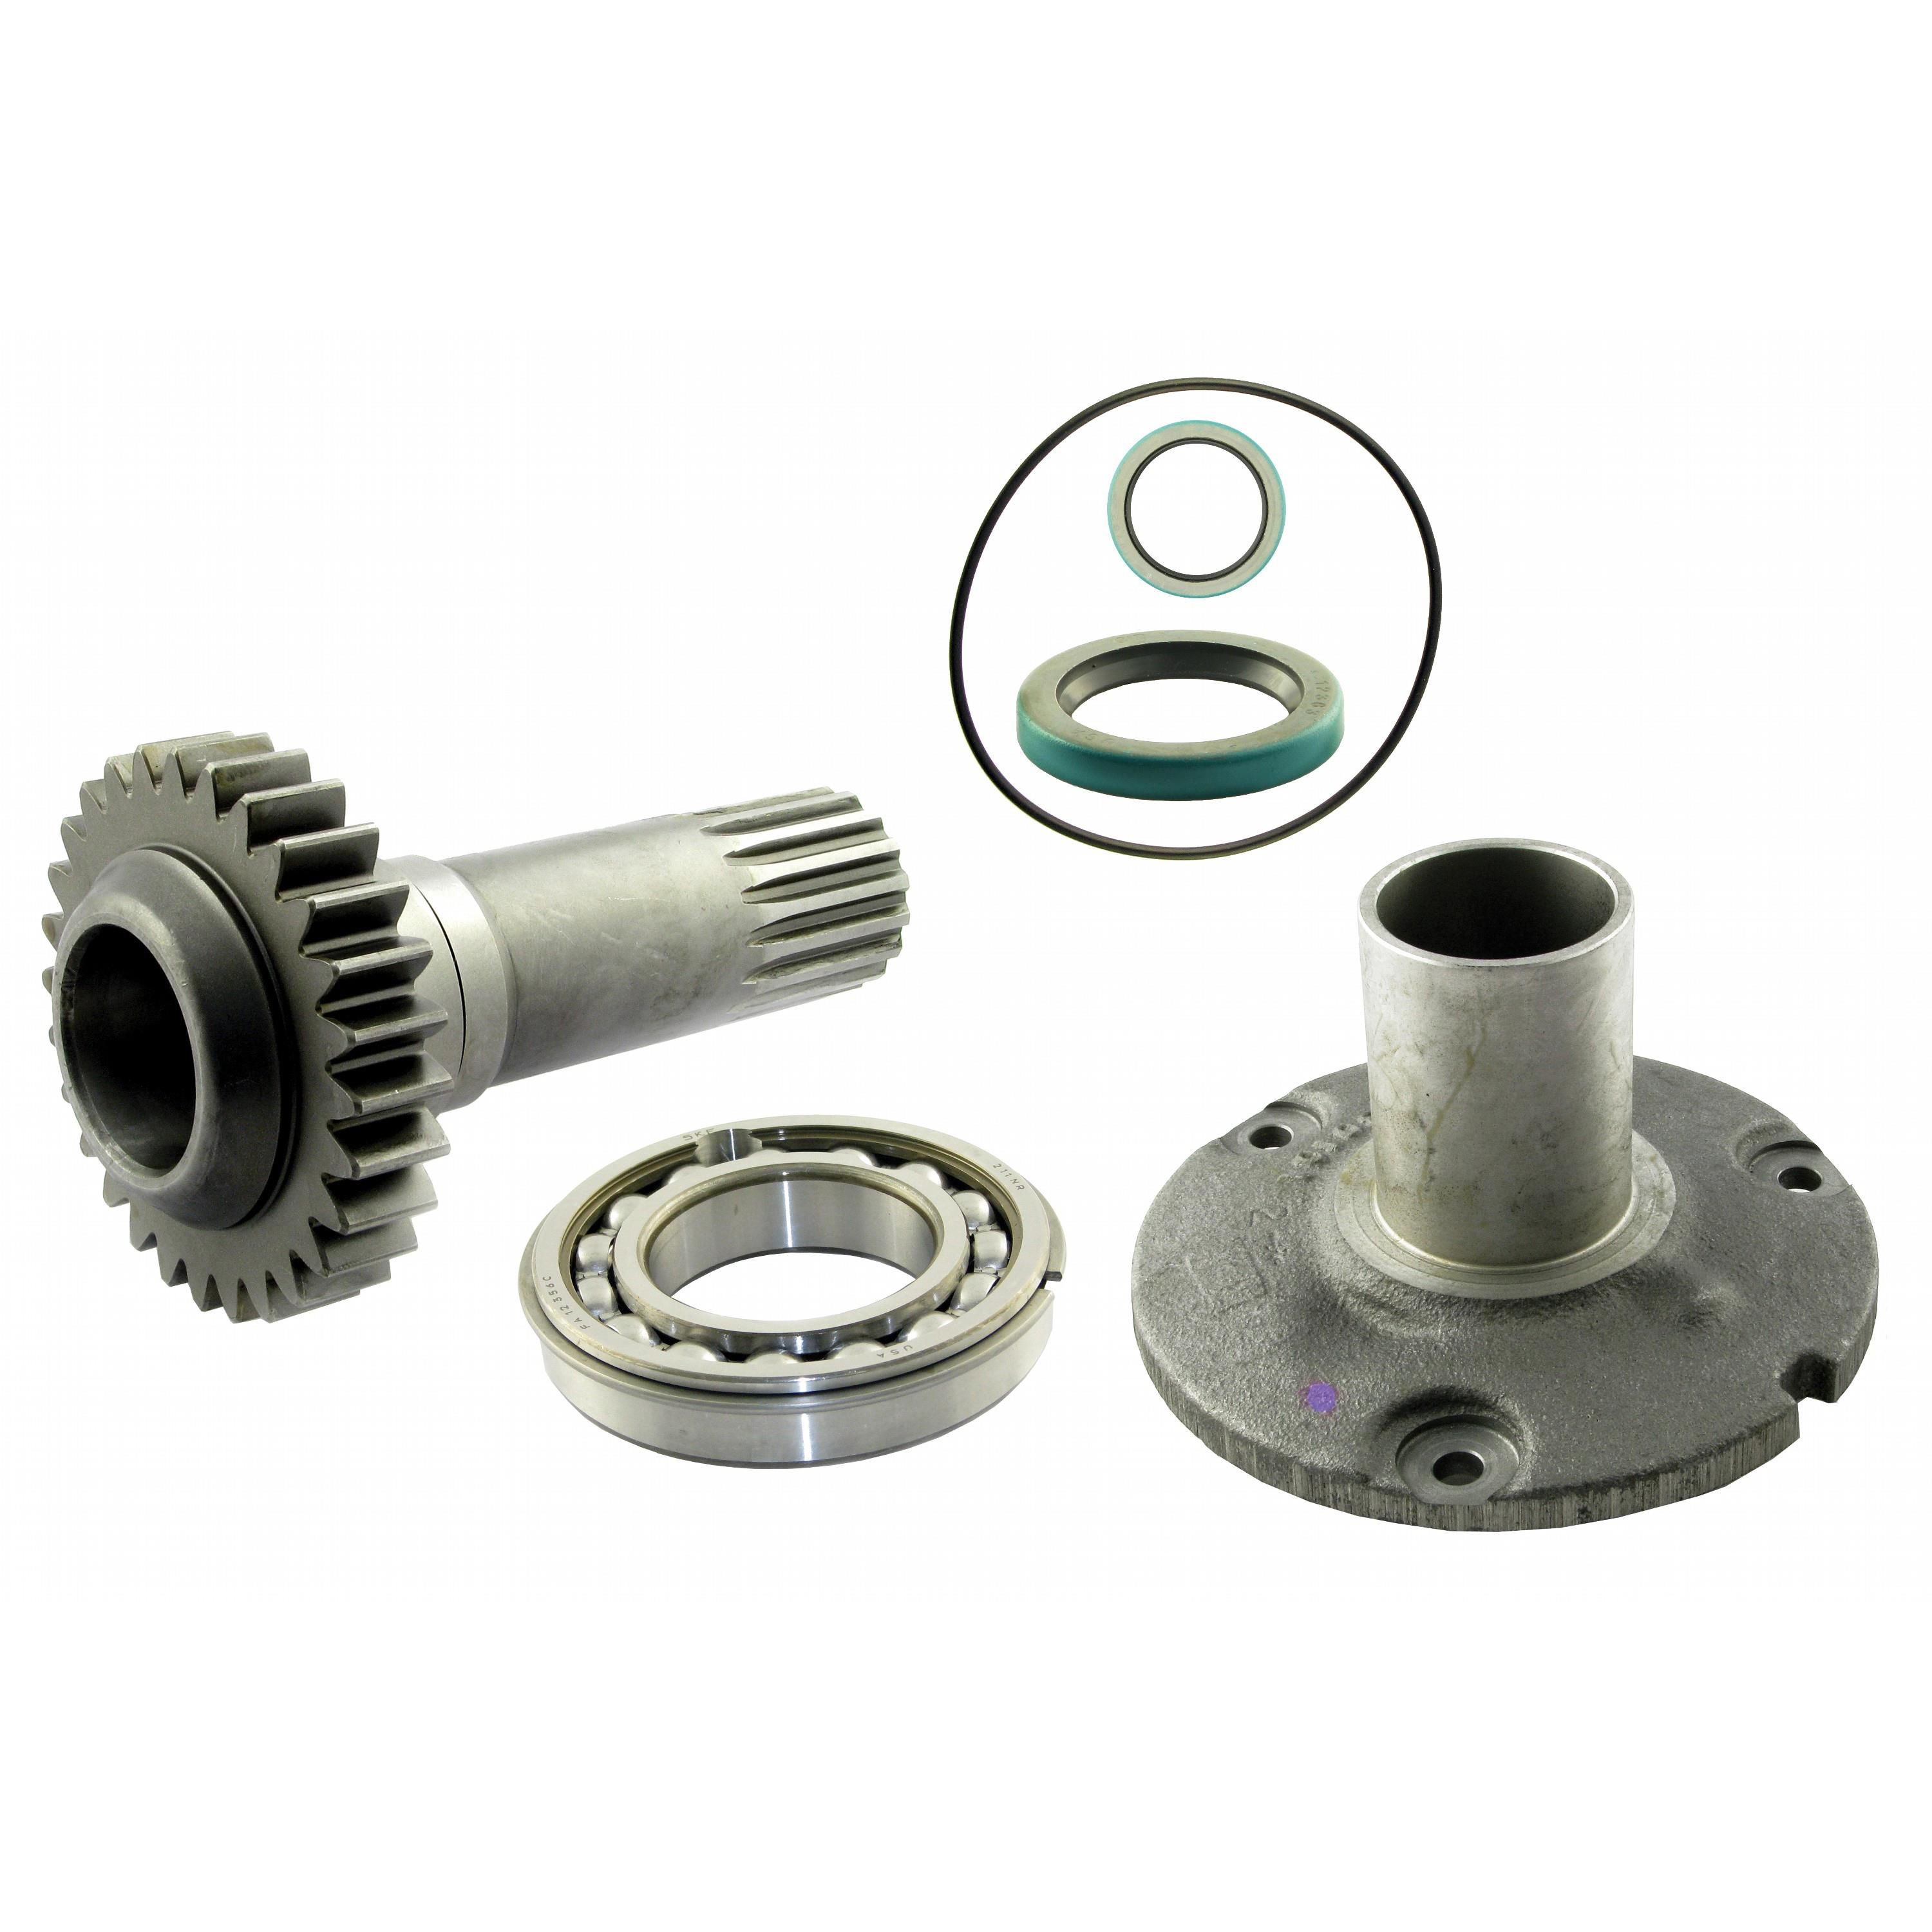 528676 Kit - IPTO Drive Gear Kit, 25 Degree for International Harvester |  Up to 60% off Dealer Prices | TractorJoe.com